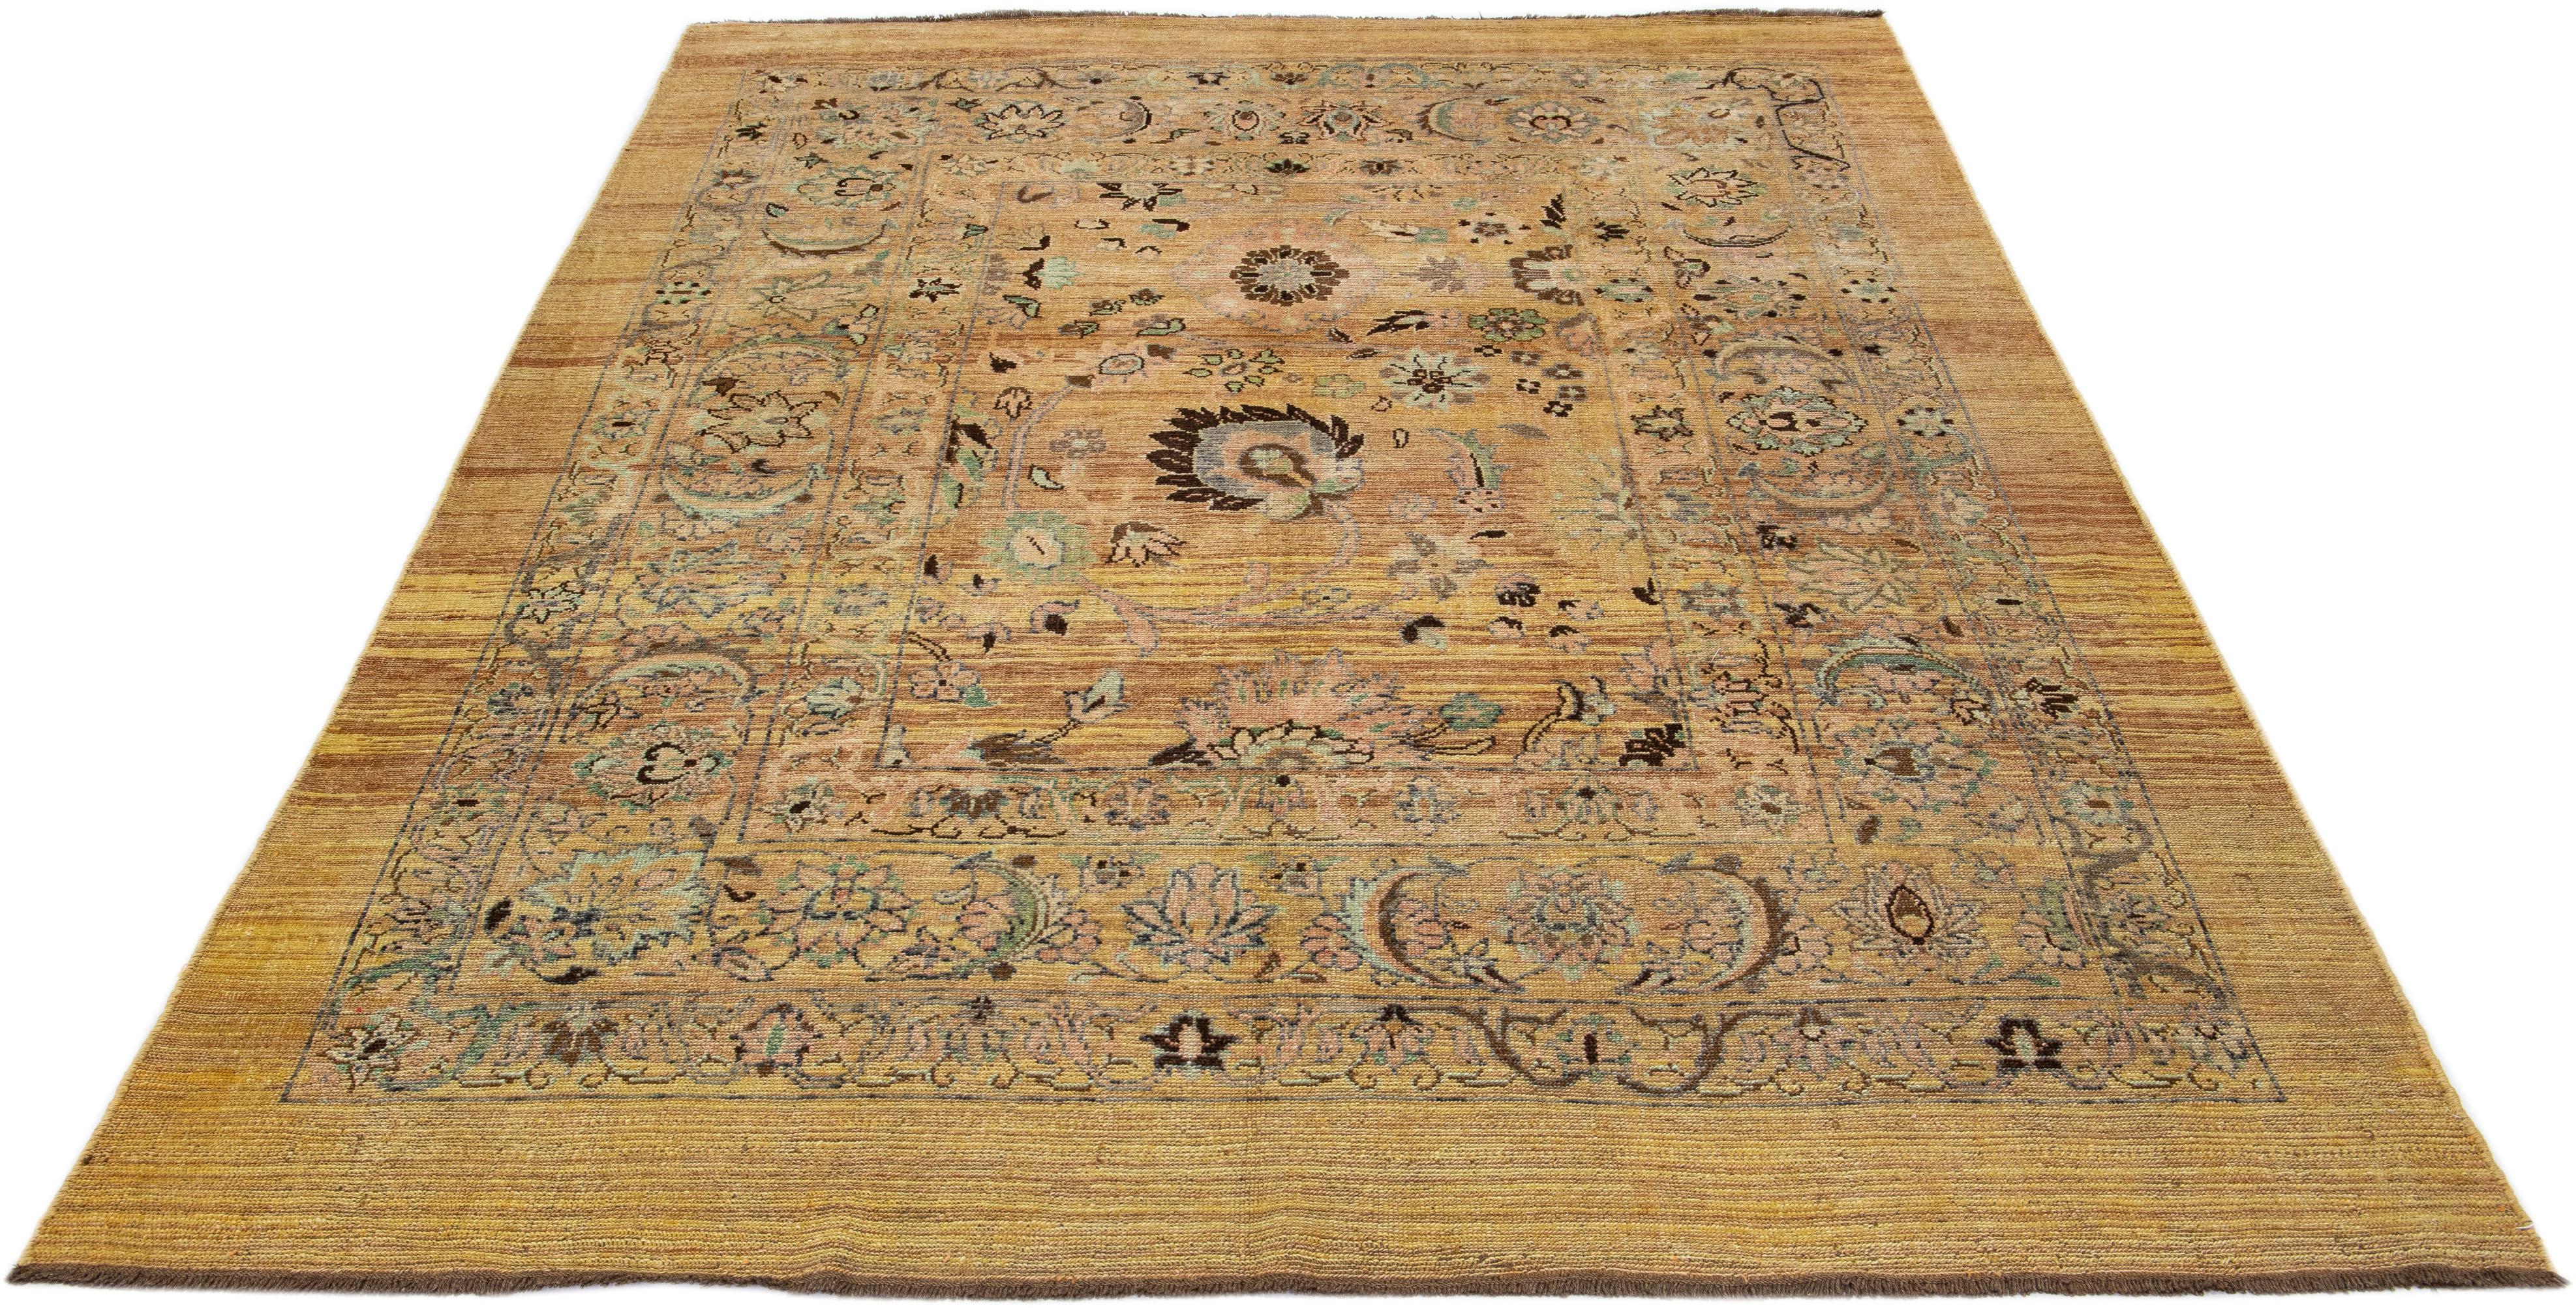 Modern Mid-Century Transitional Style Handmade Allover Floral Tan Wool Rug by Apadana For Sale